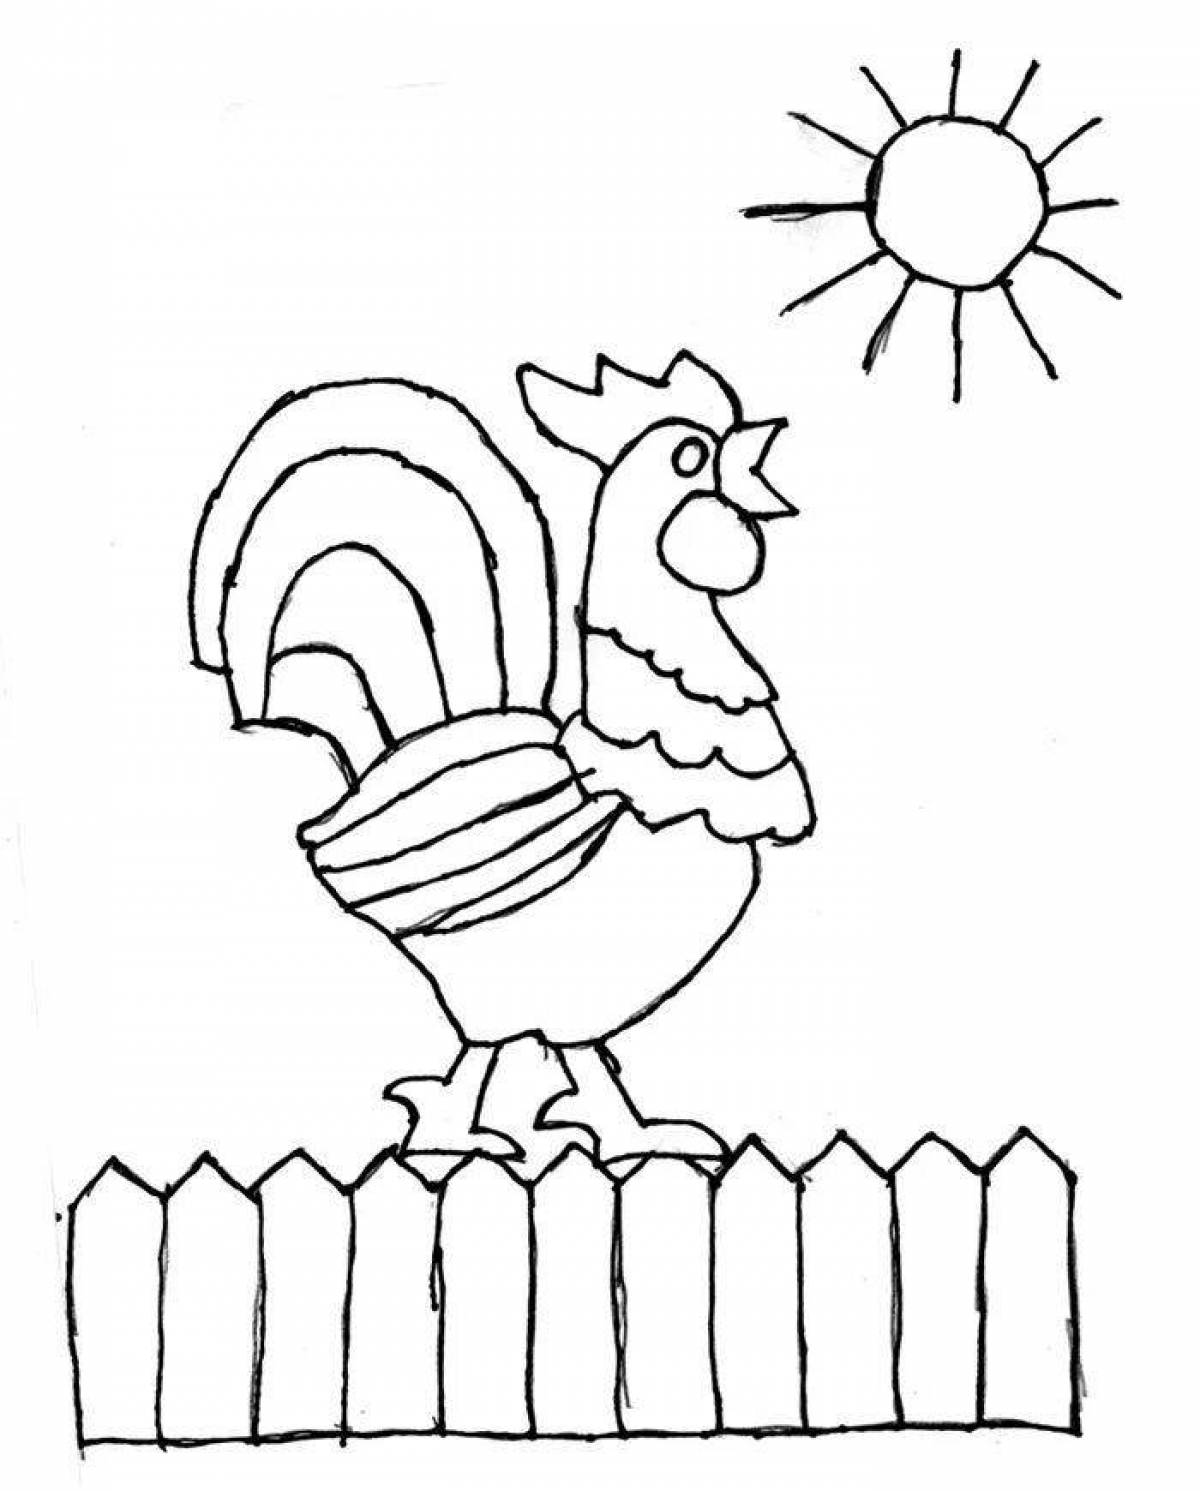 Coloring book funny rooster for kids